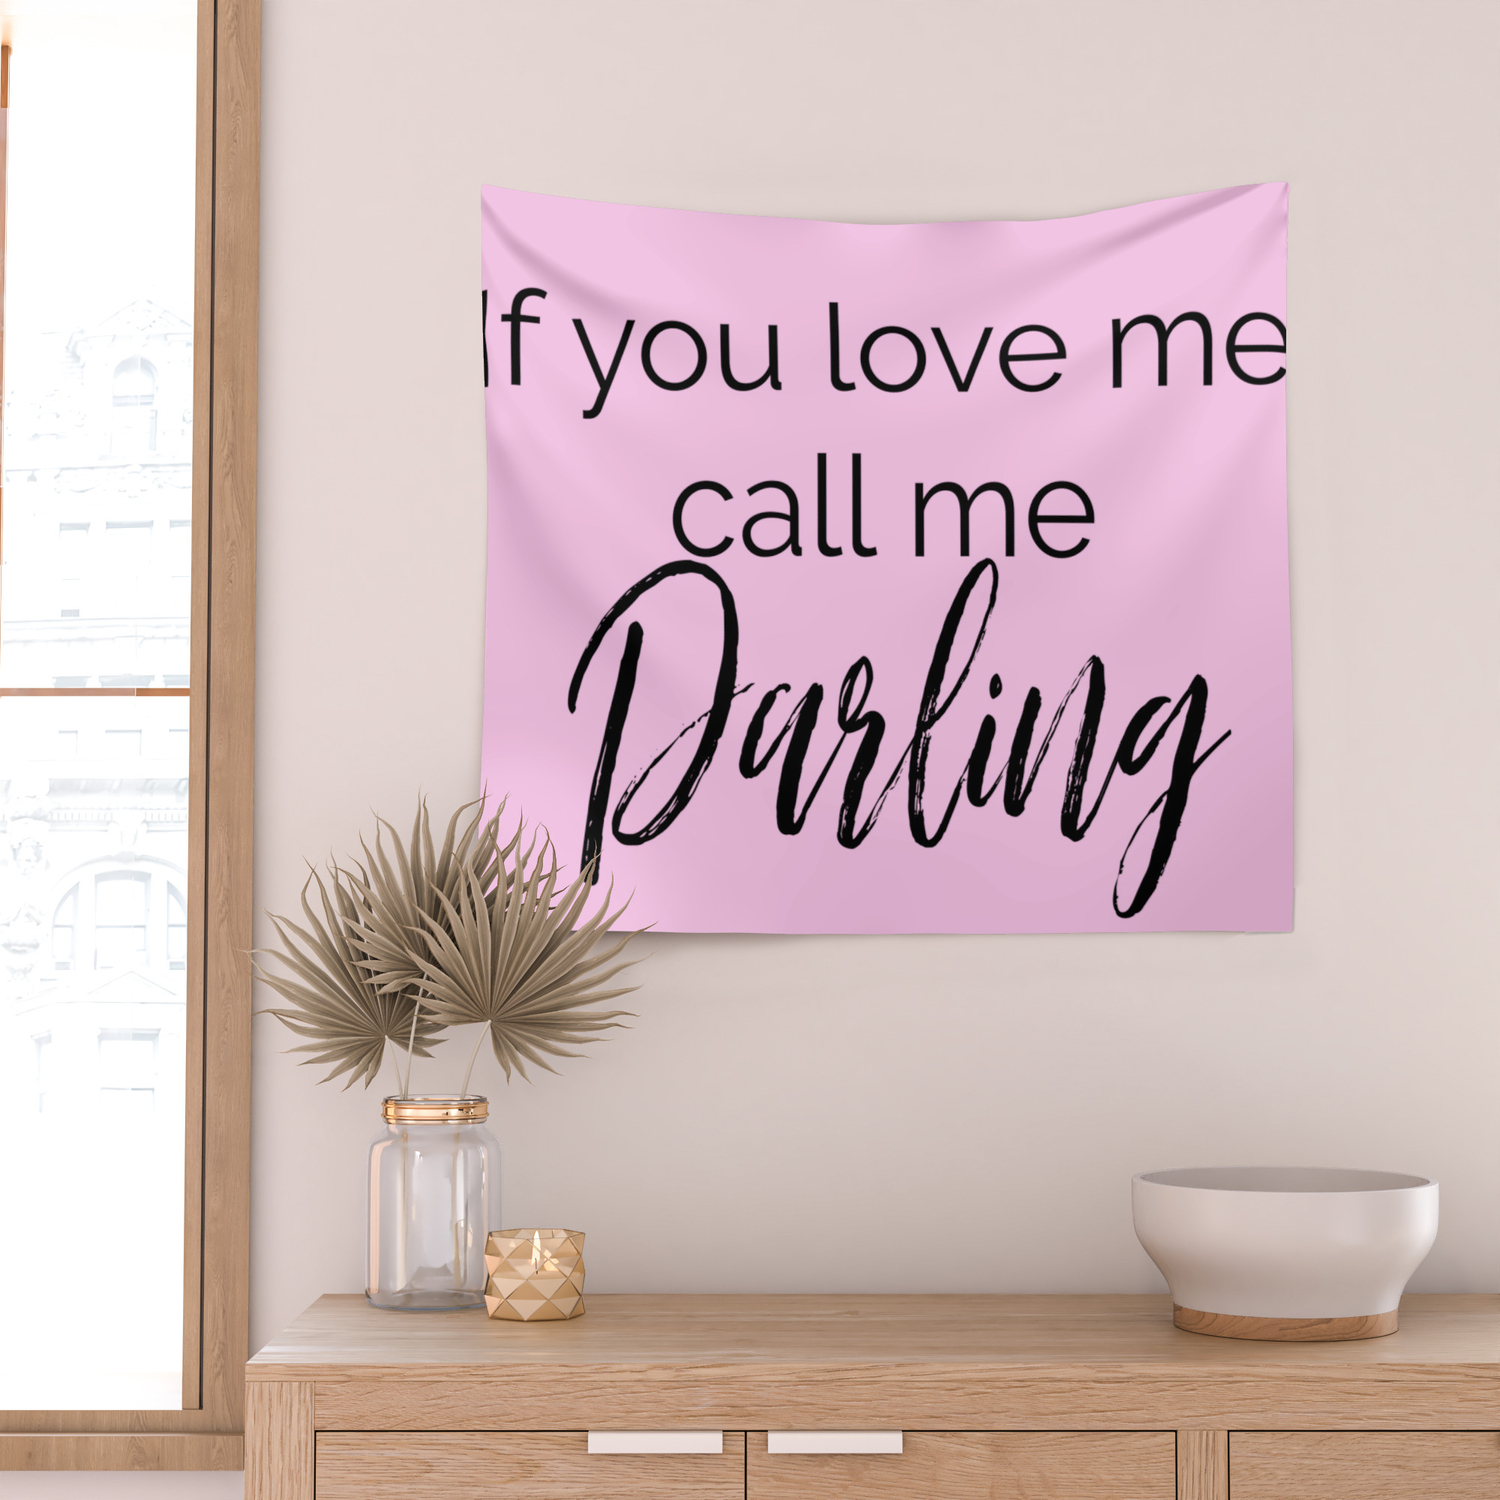 Why does he call me darling